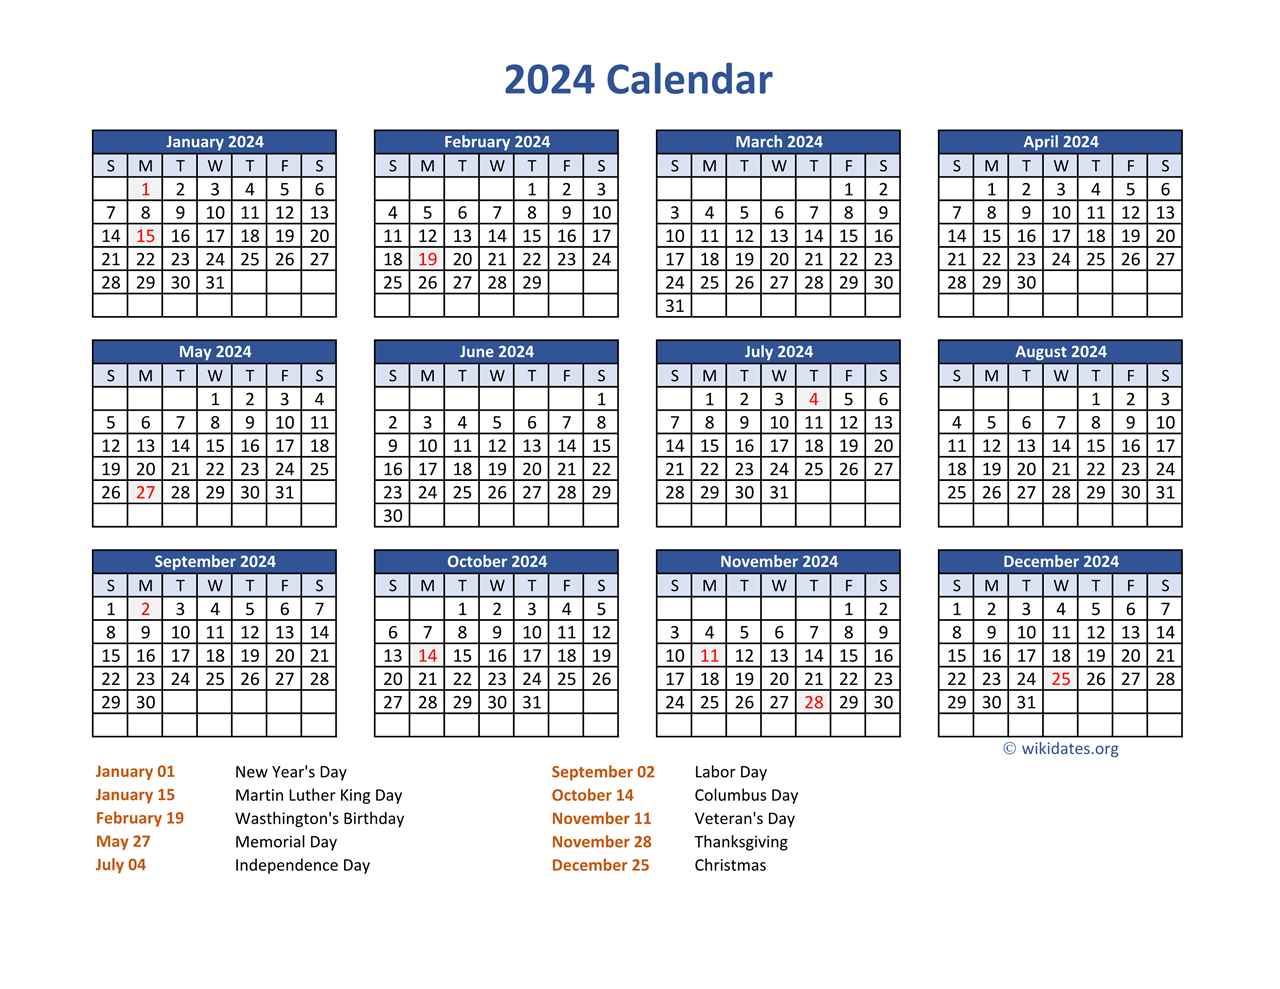 Pdf Calendar 2024 With Federal Holidays | Wikidates for 2024 Us Calendar With Holidays Printable